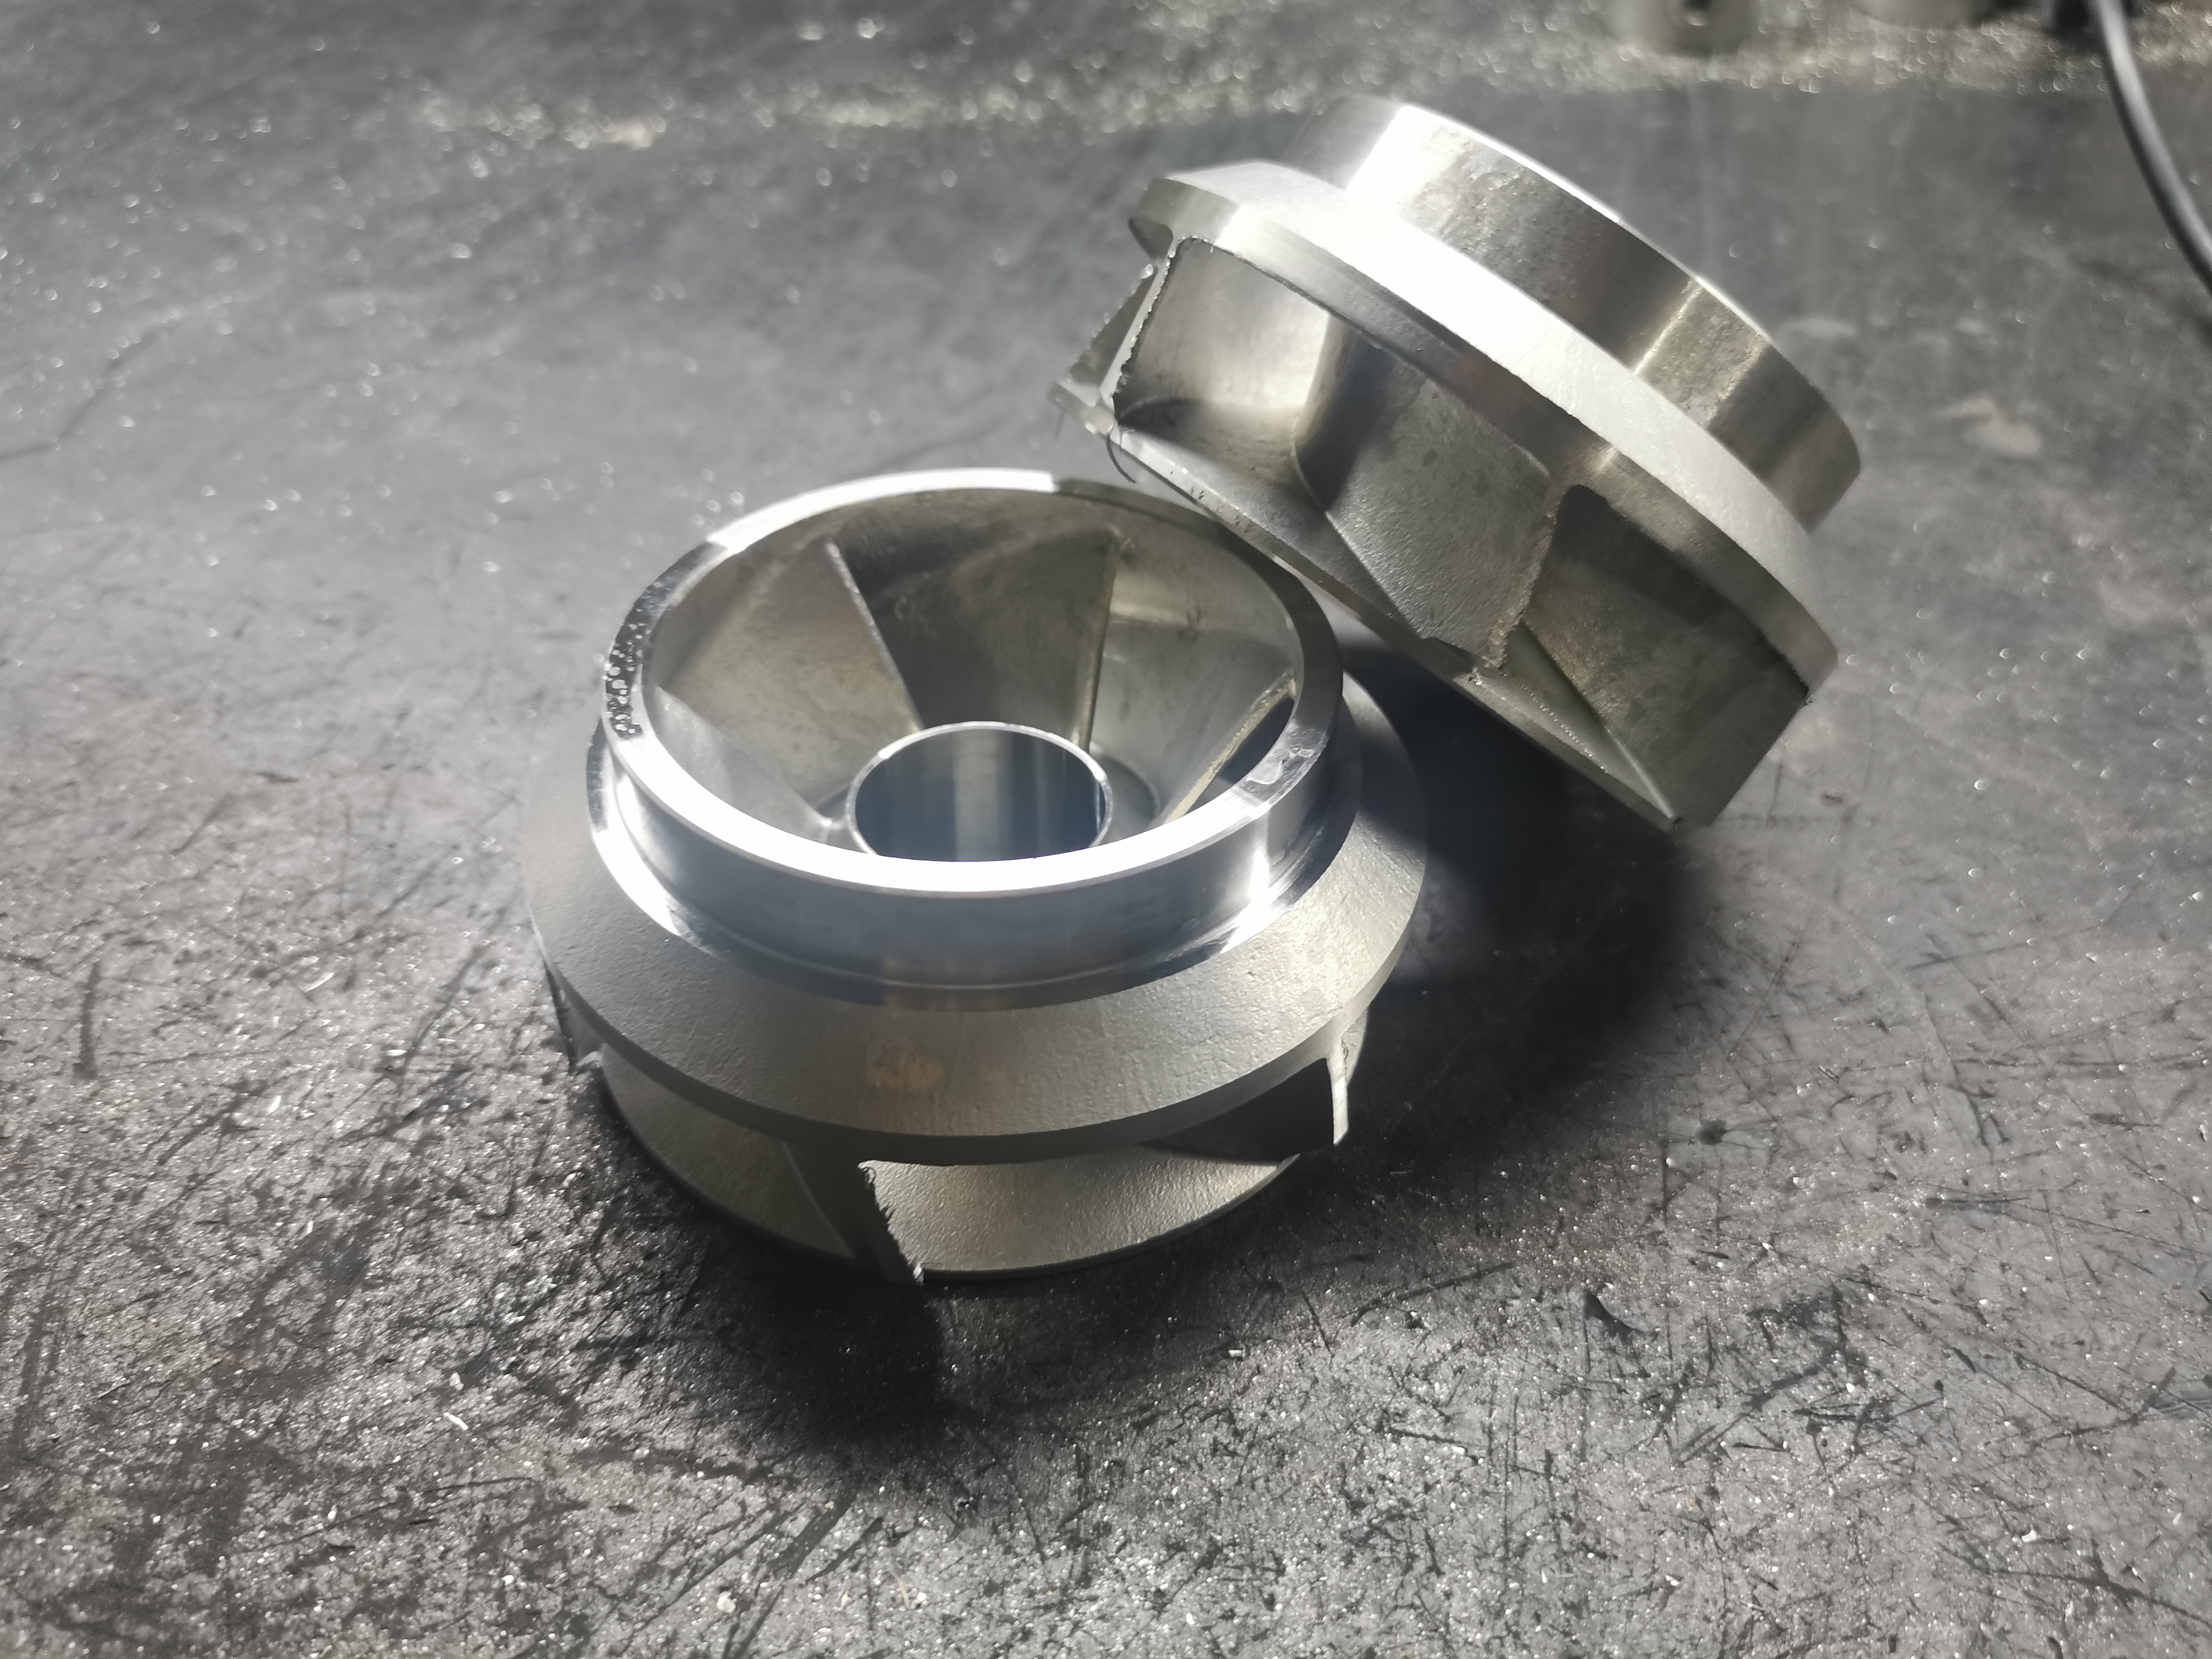 The difference between 316 and 304 stainless steel casting